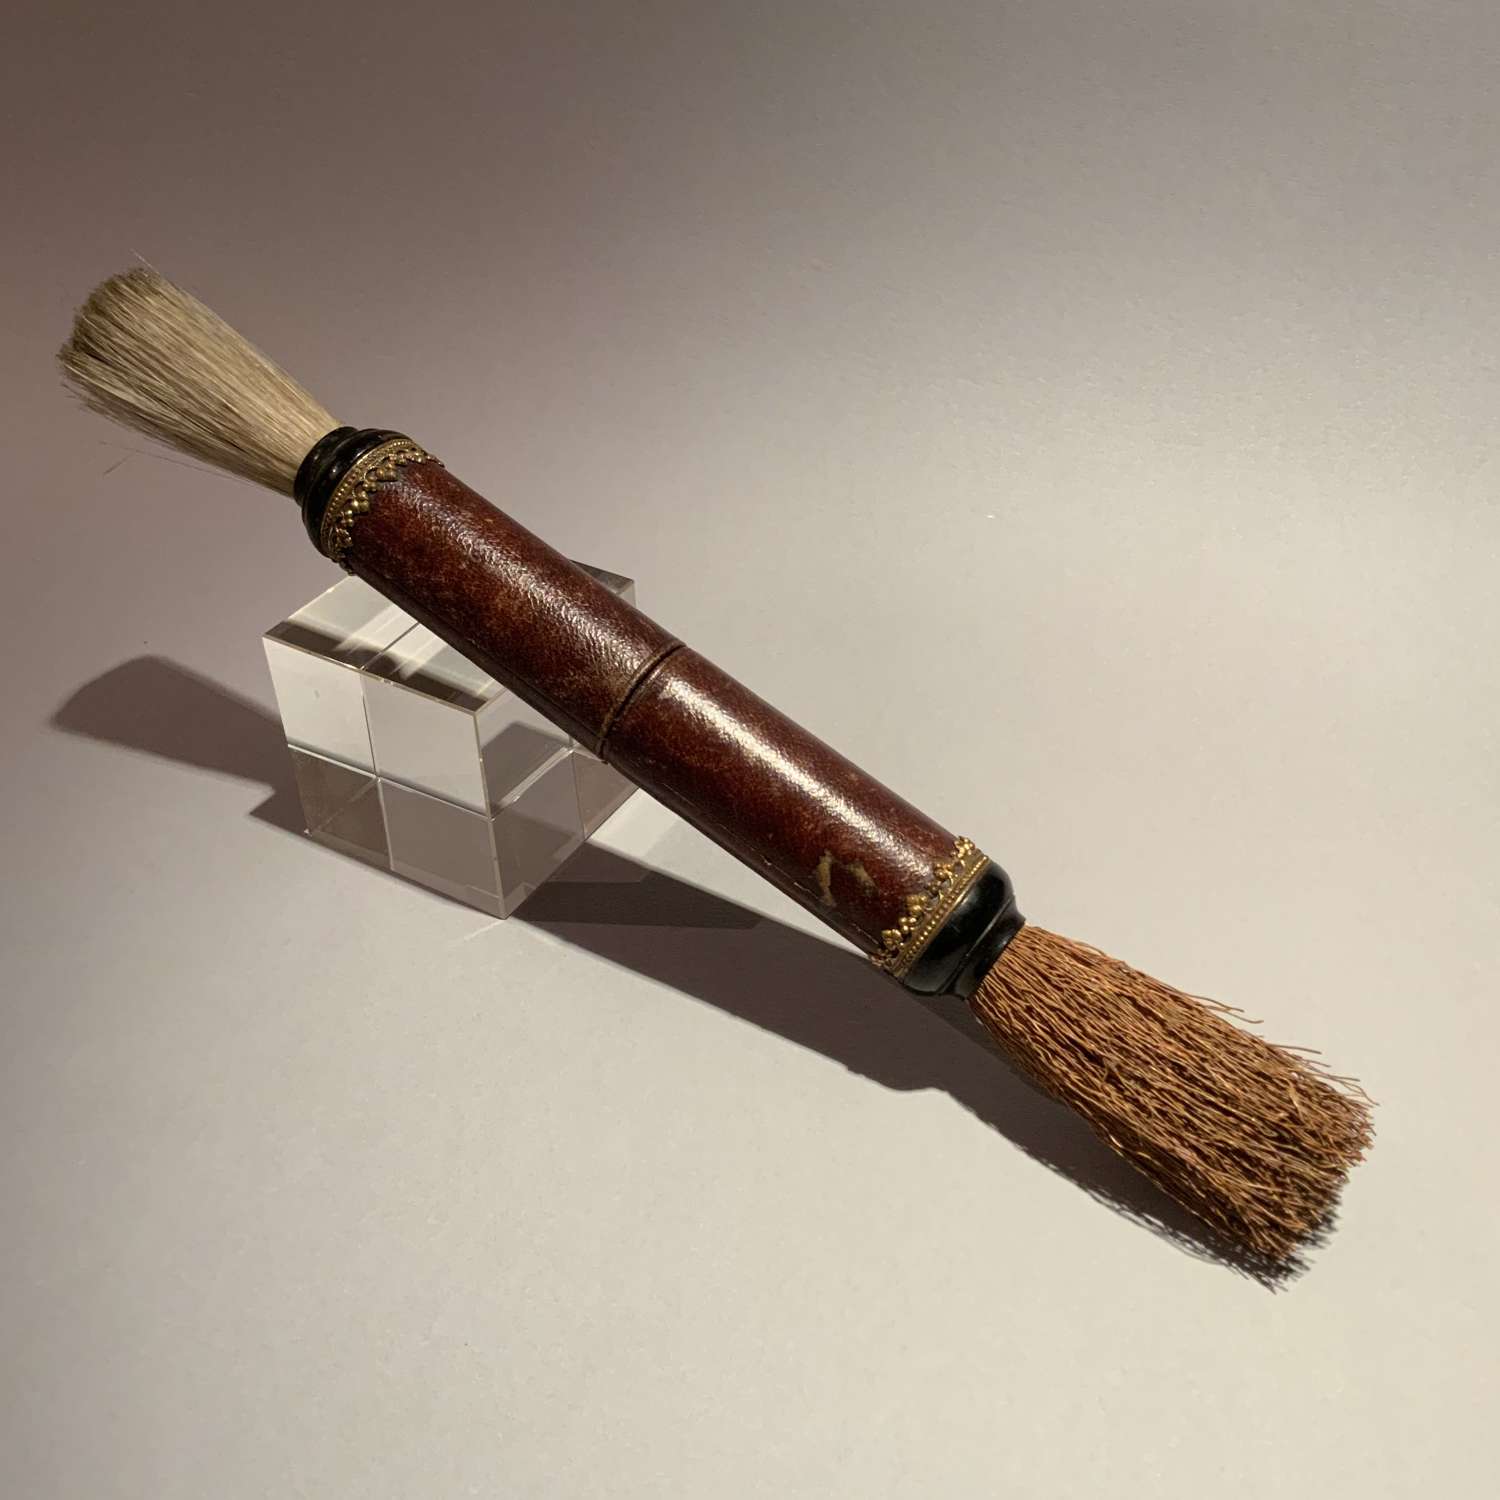 A Very Interesting & Unusual Whisk Brush, Possibly for a Bibliophile